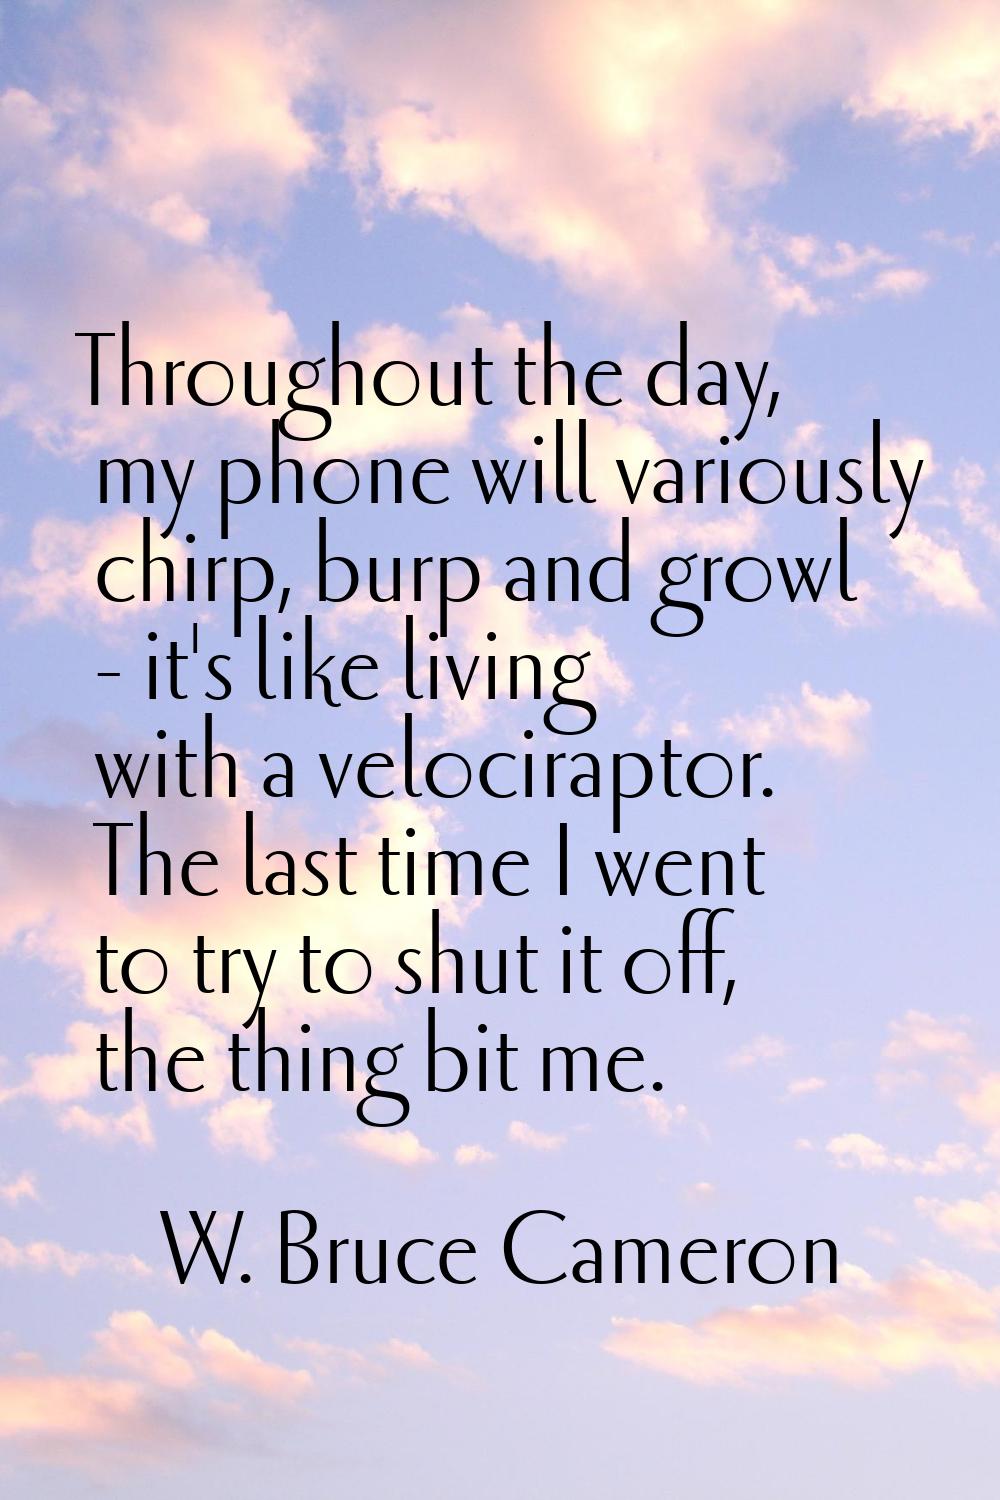 Throughout the day, my phone will variously chirp, burp and growl - it's like living with a velocir